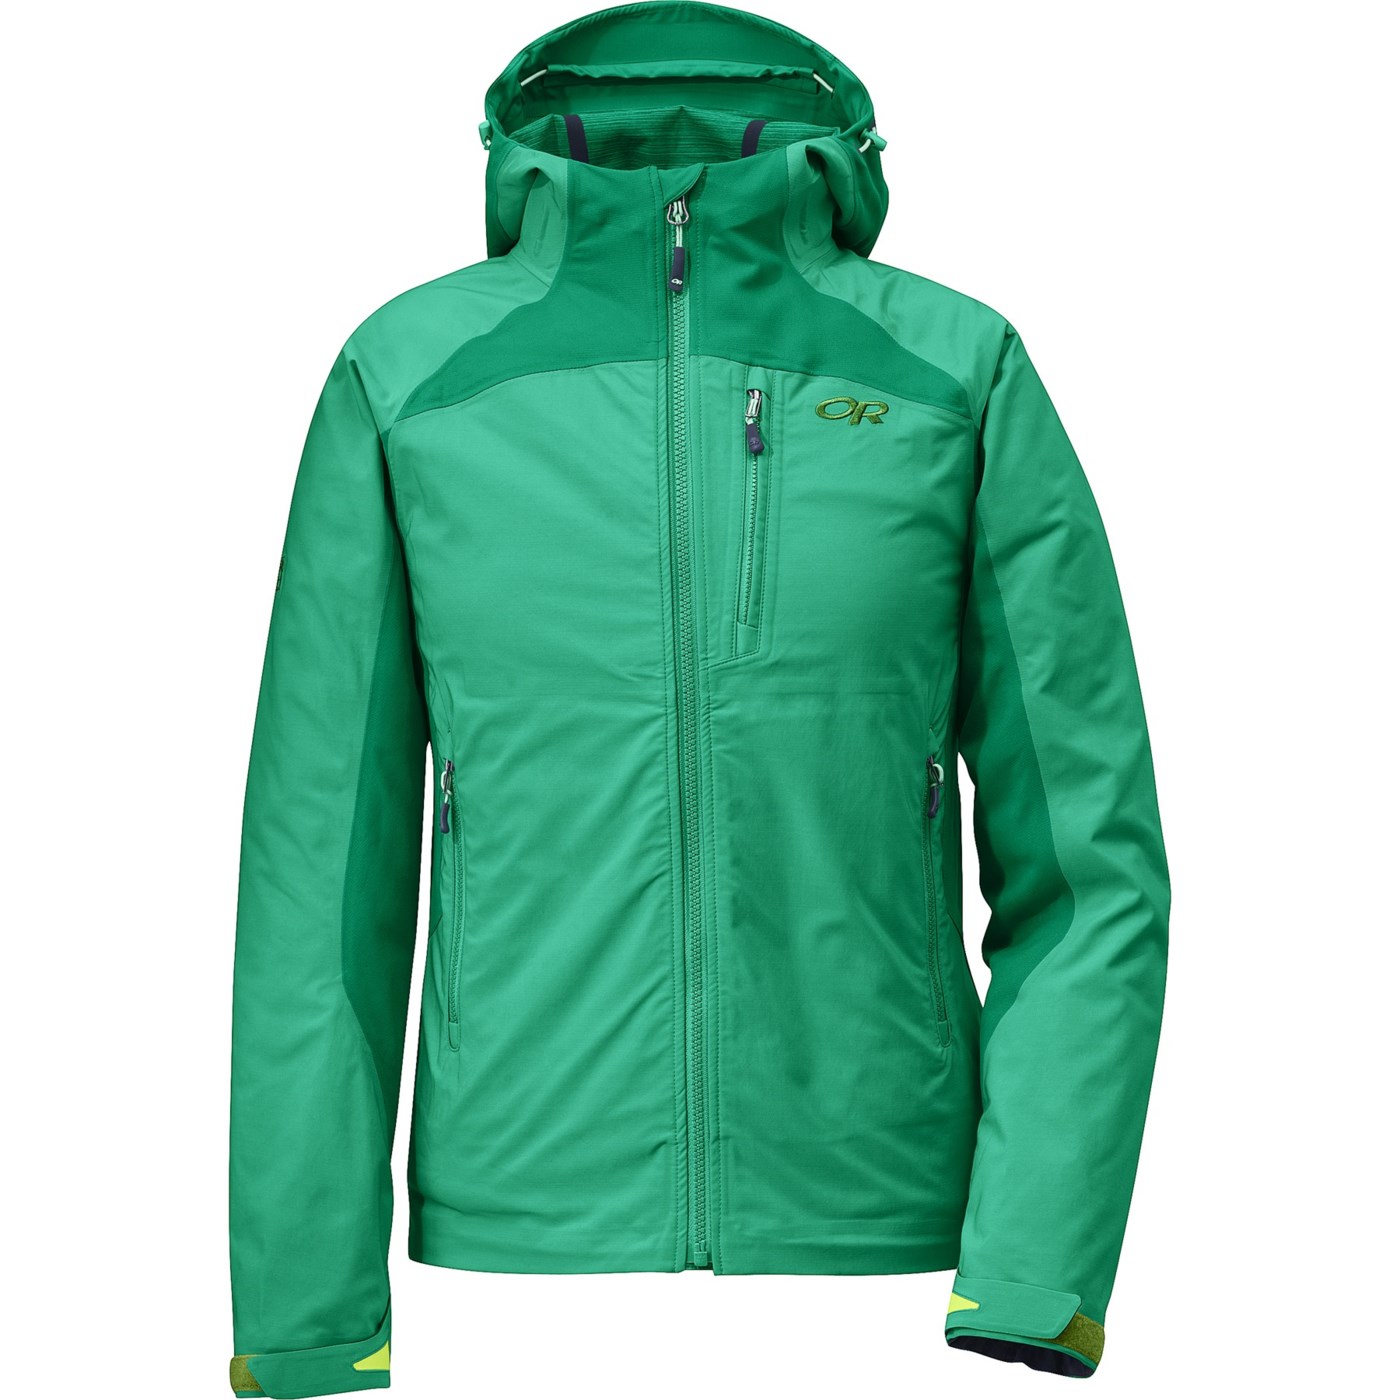 Outdoor Research Enchainment Jacket (For Women) 7015J 69